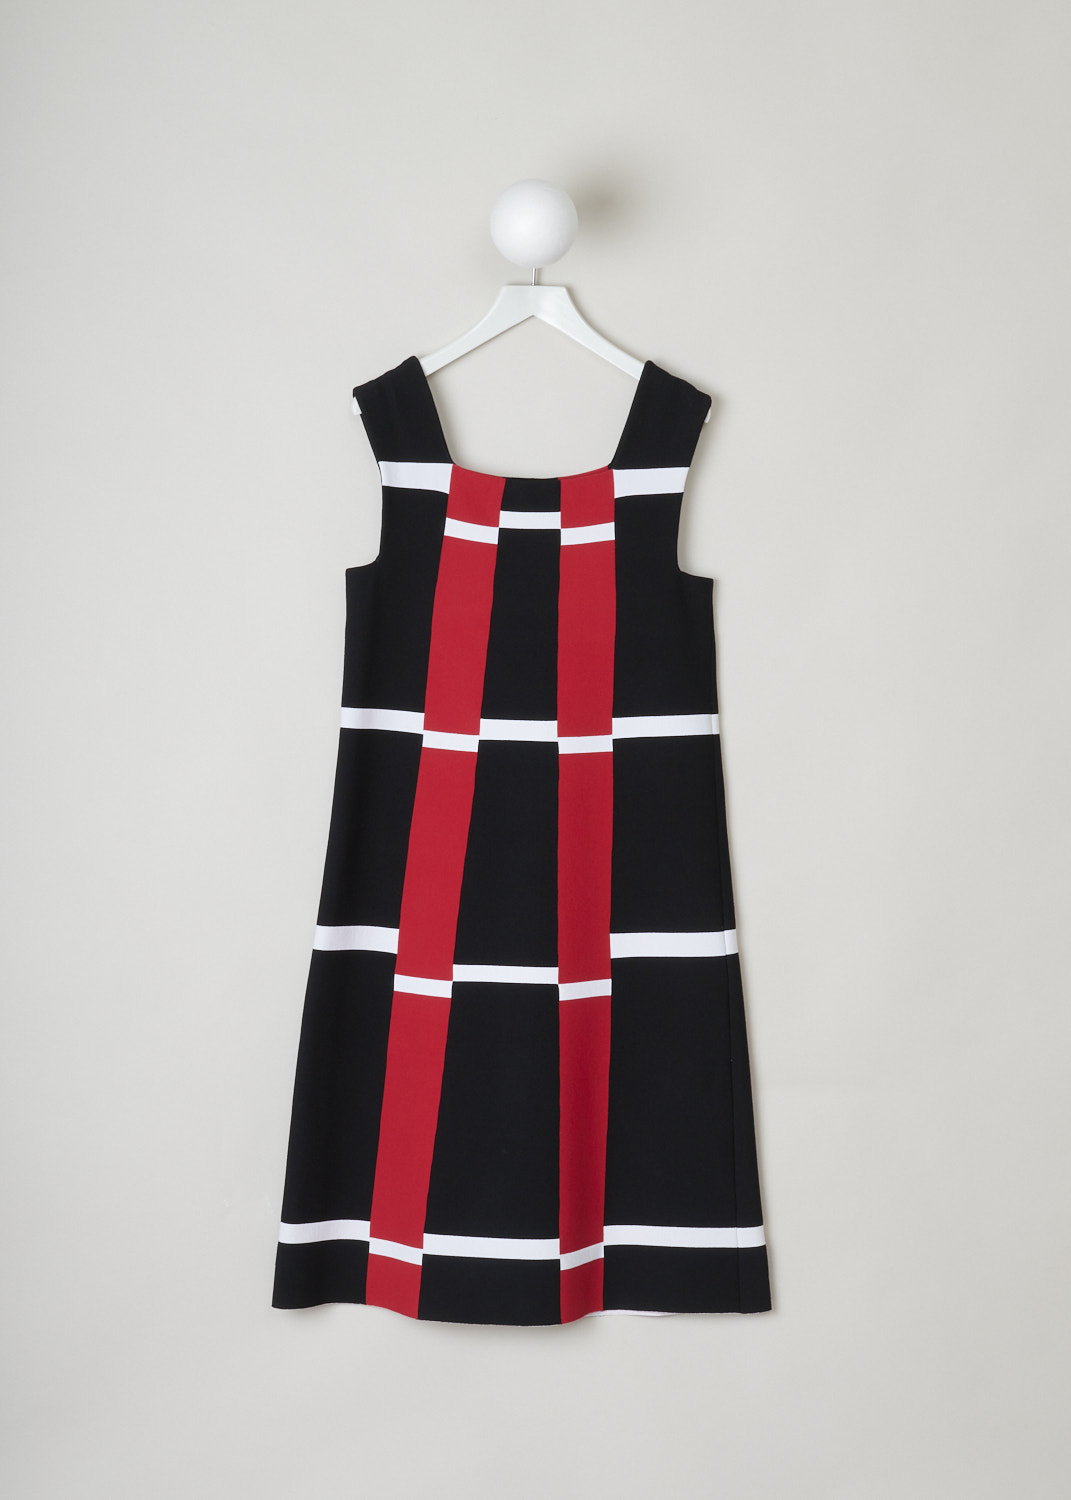 AlaÃ¯a, Mid-length a-line dress in black red and white, 7E9RI18RM327_CM93, print, front, A Knitted knee-lengthdress in sixties style, which is reinforced by the tri-colour combination being the black white and red. Elegant, straight neckline, with a sleeveless and slip-on design. 